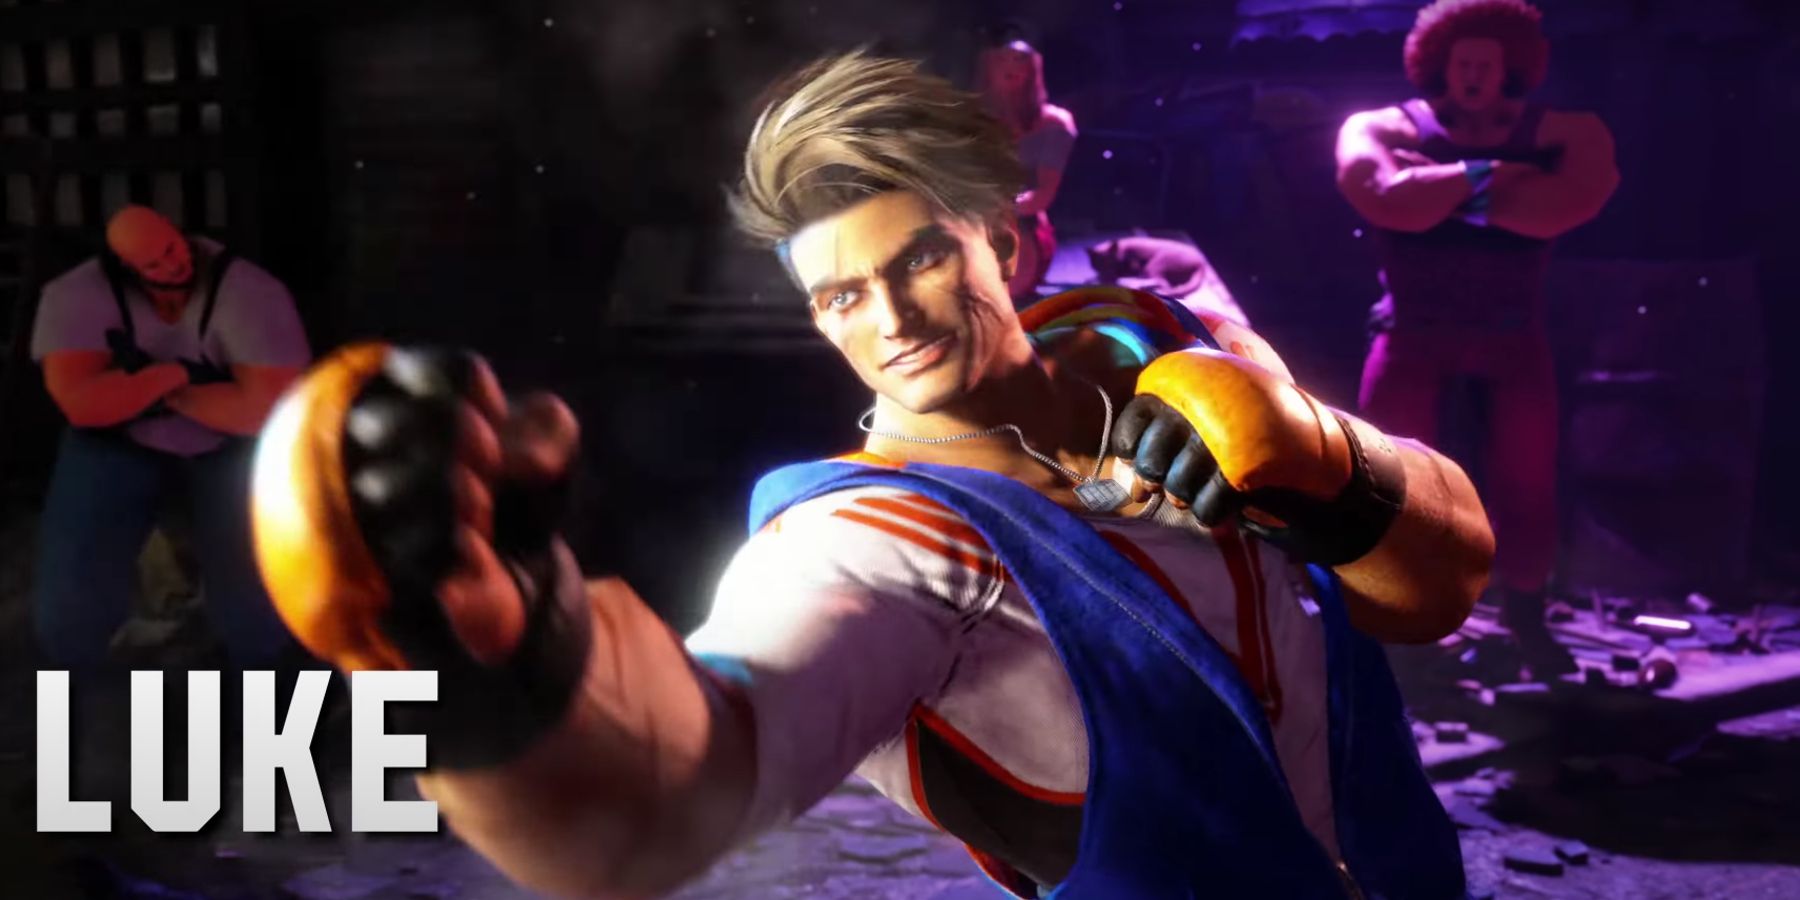 Luke returns in Street Fighter 6, ready to fight with gloves on his fists.